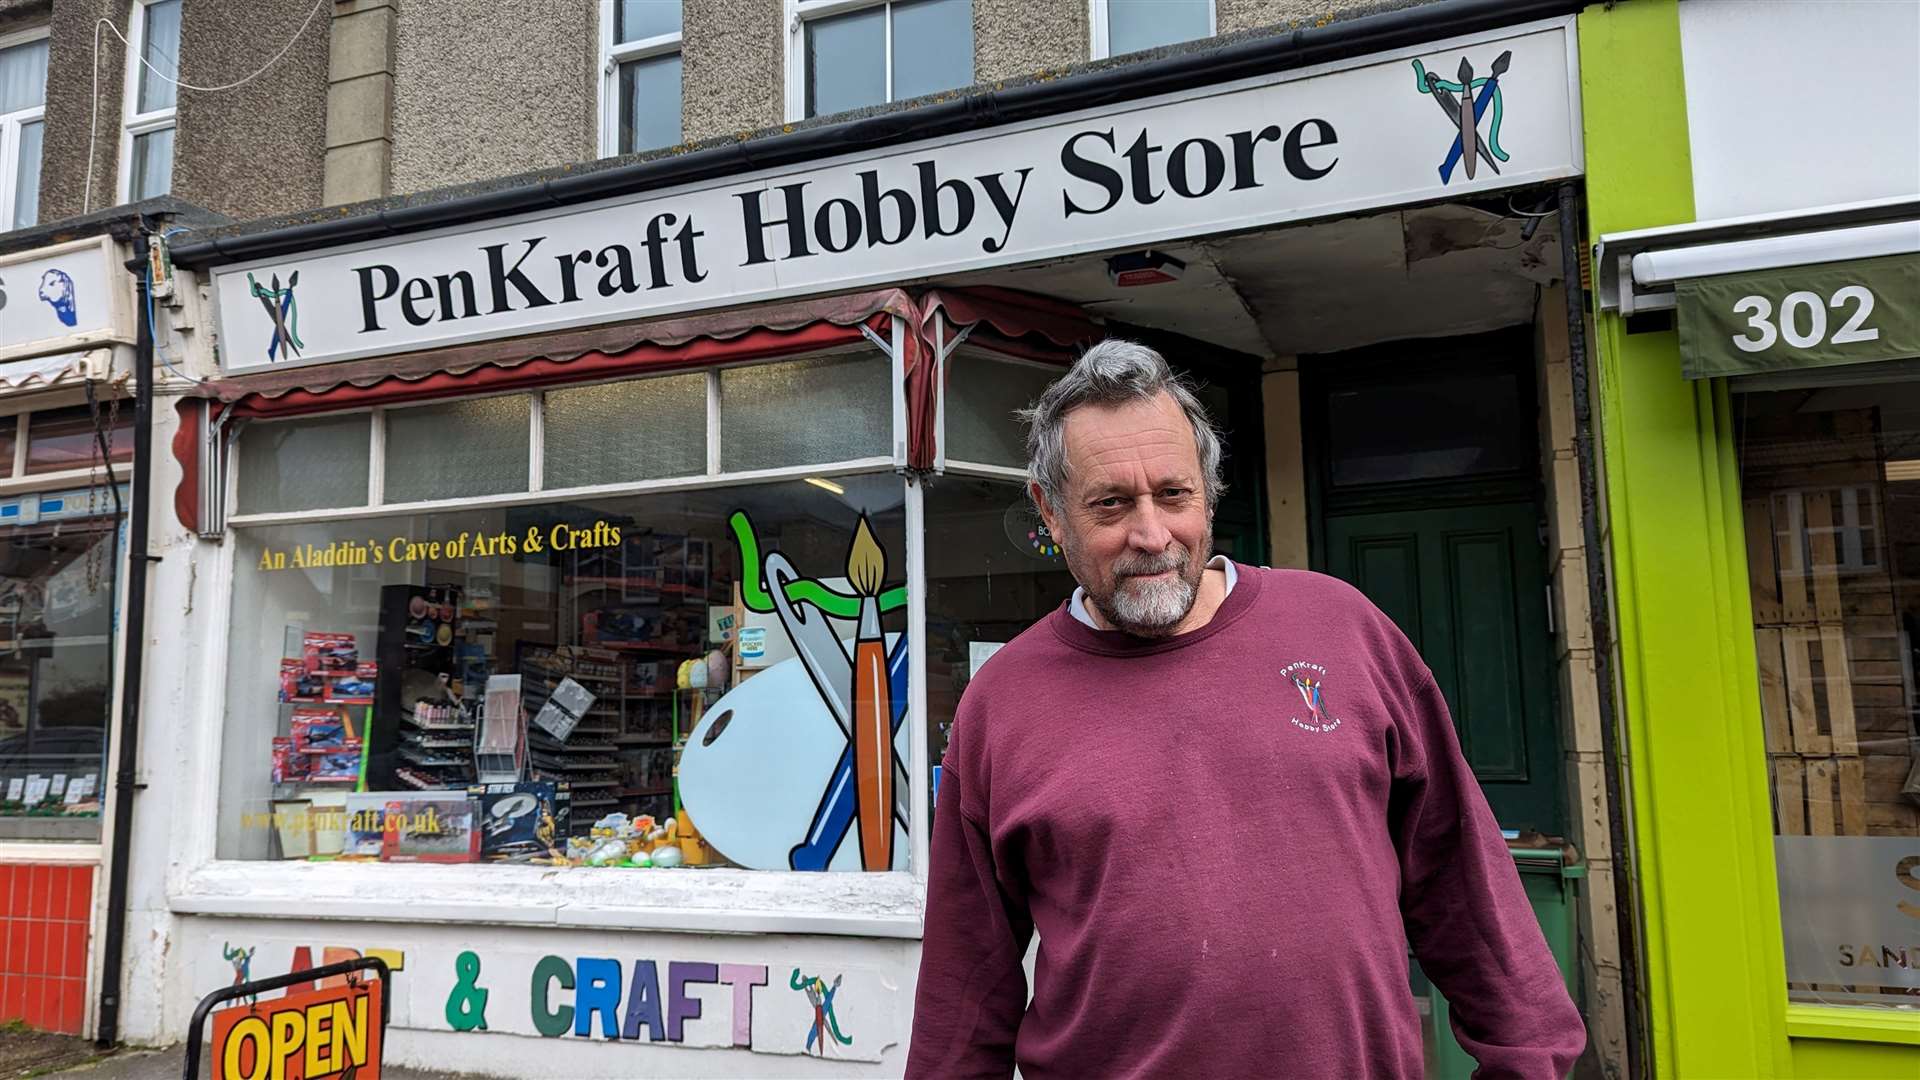 Peter Ingelbrecht has owned the PenKraft Hobby Store in Cheriton High Street for 24 years